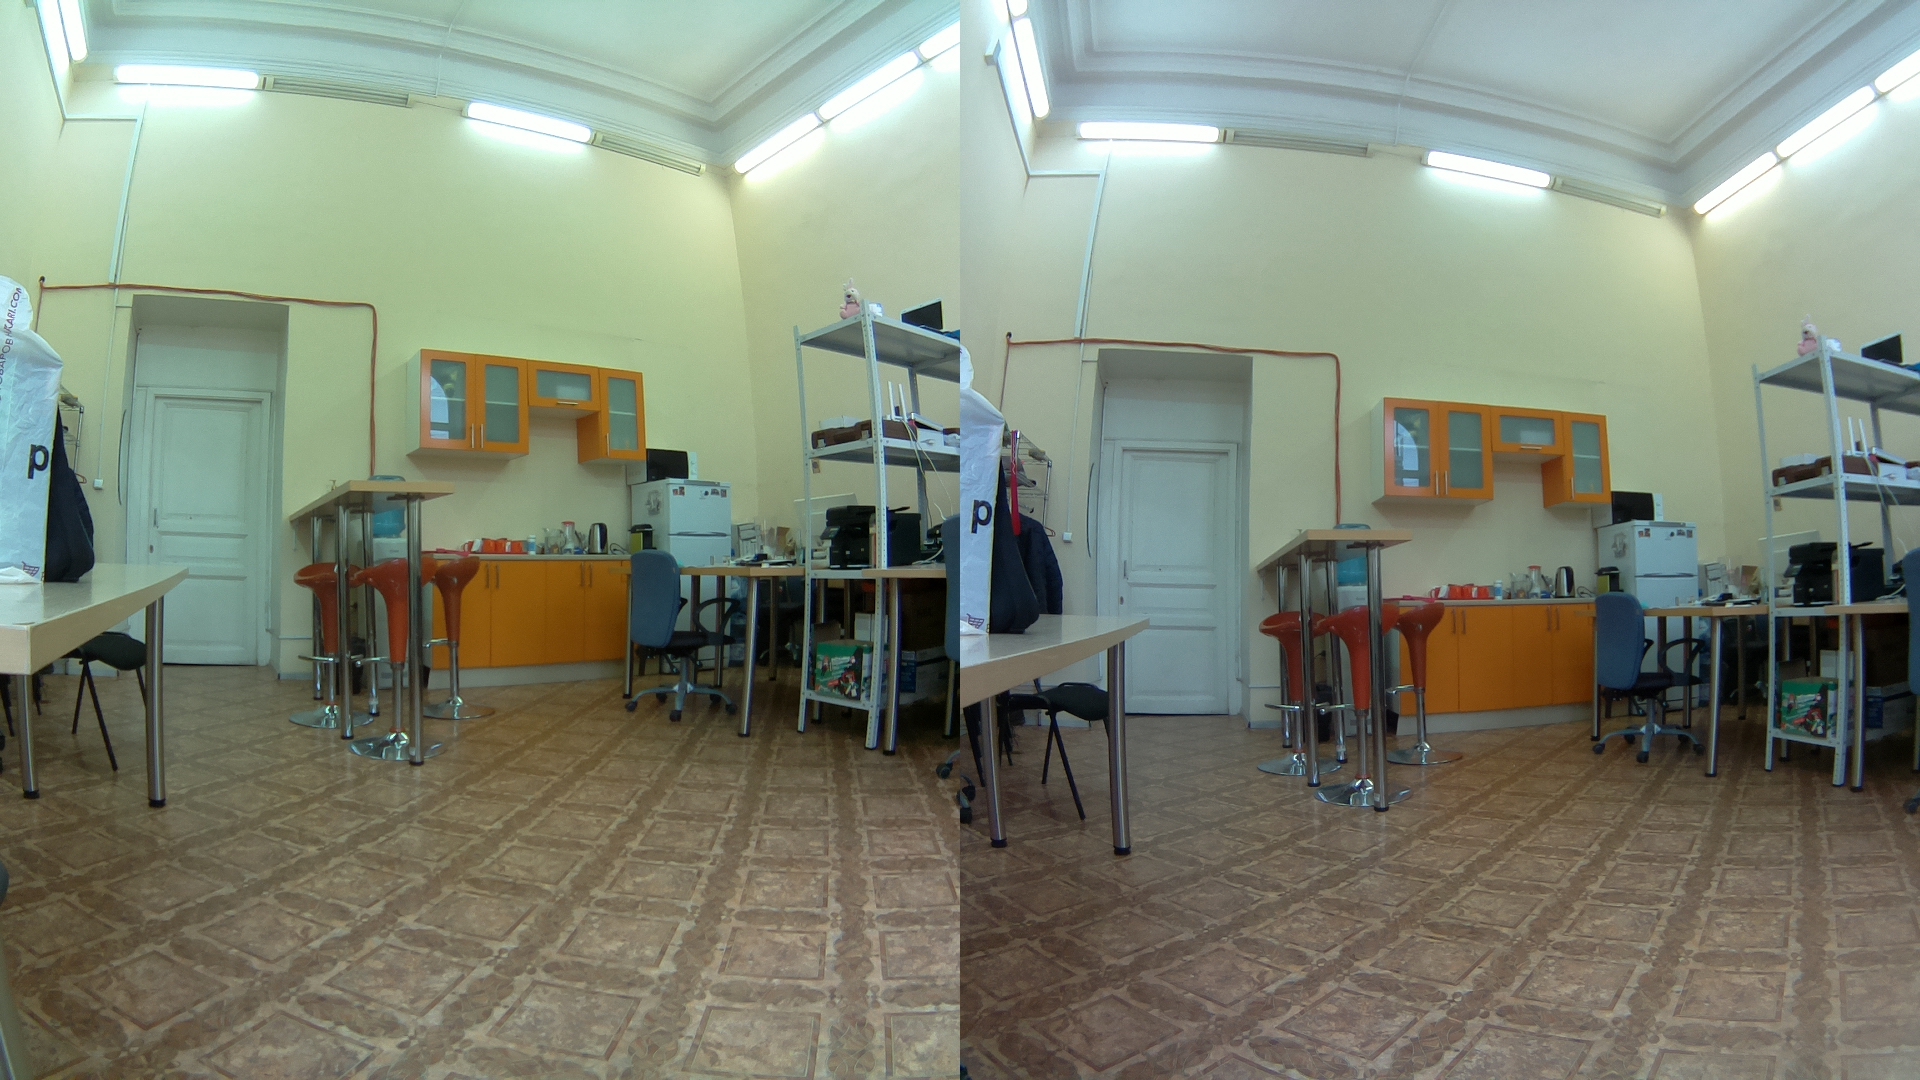 stereoscopic image from the stereopi